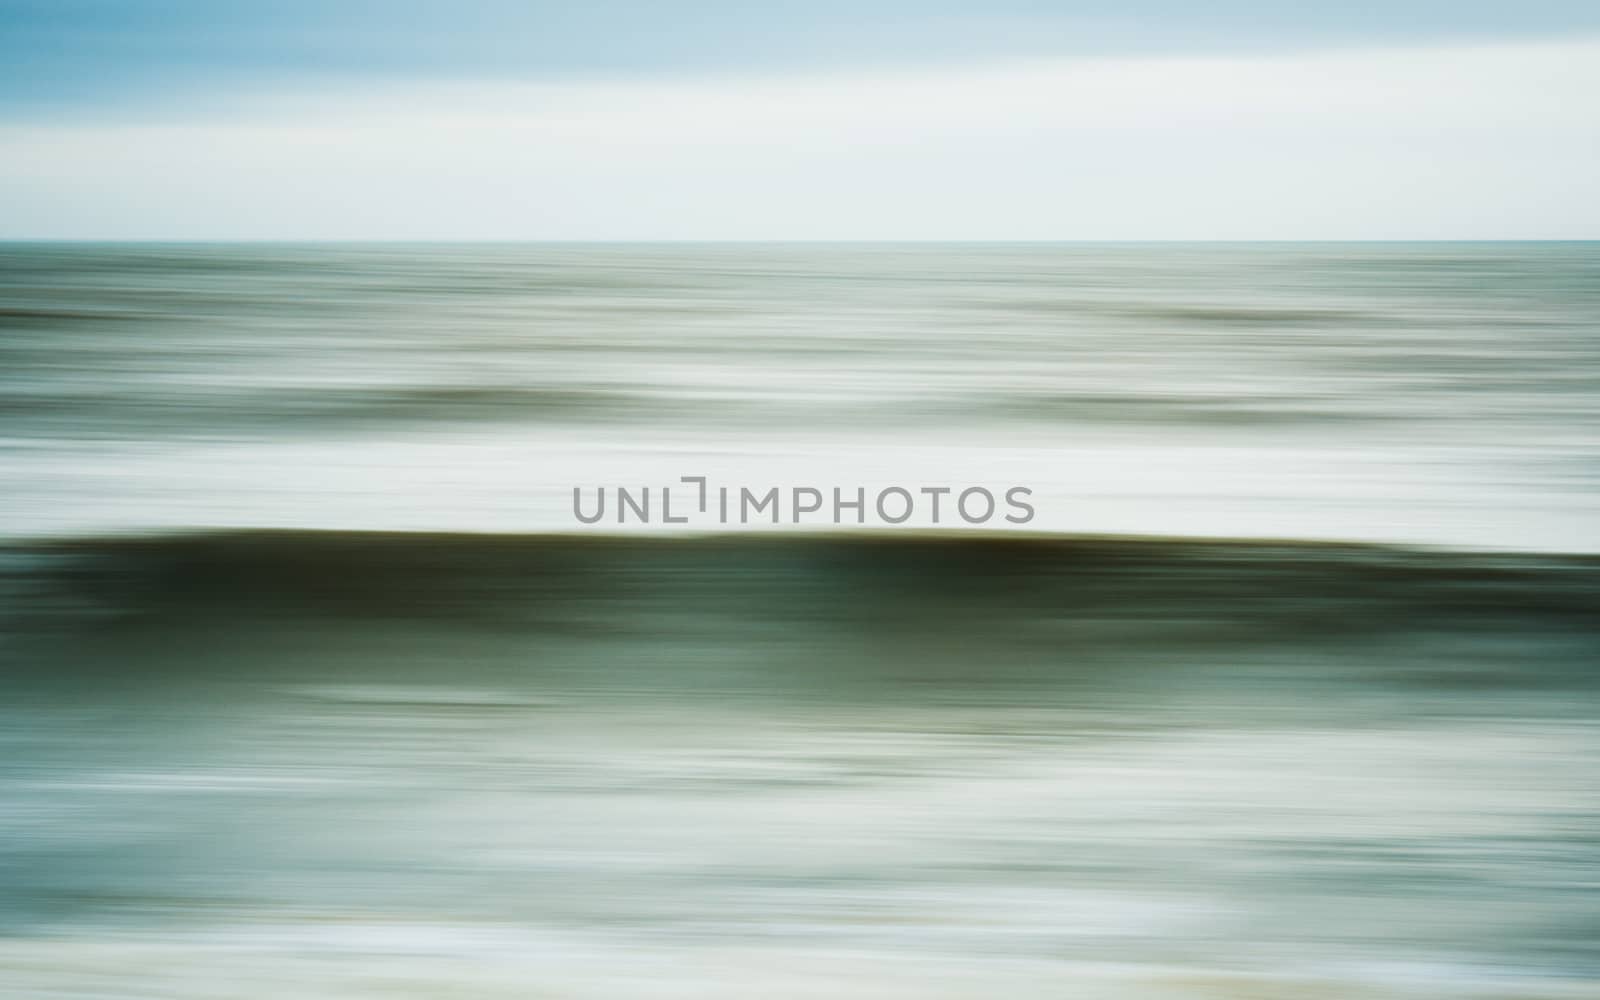 Intentional camera movement of ocean wave, dreamy seascape